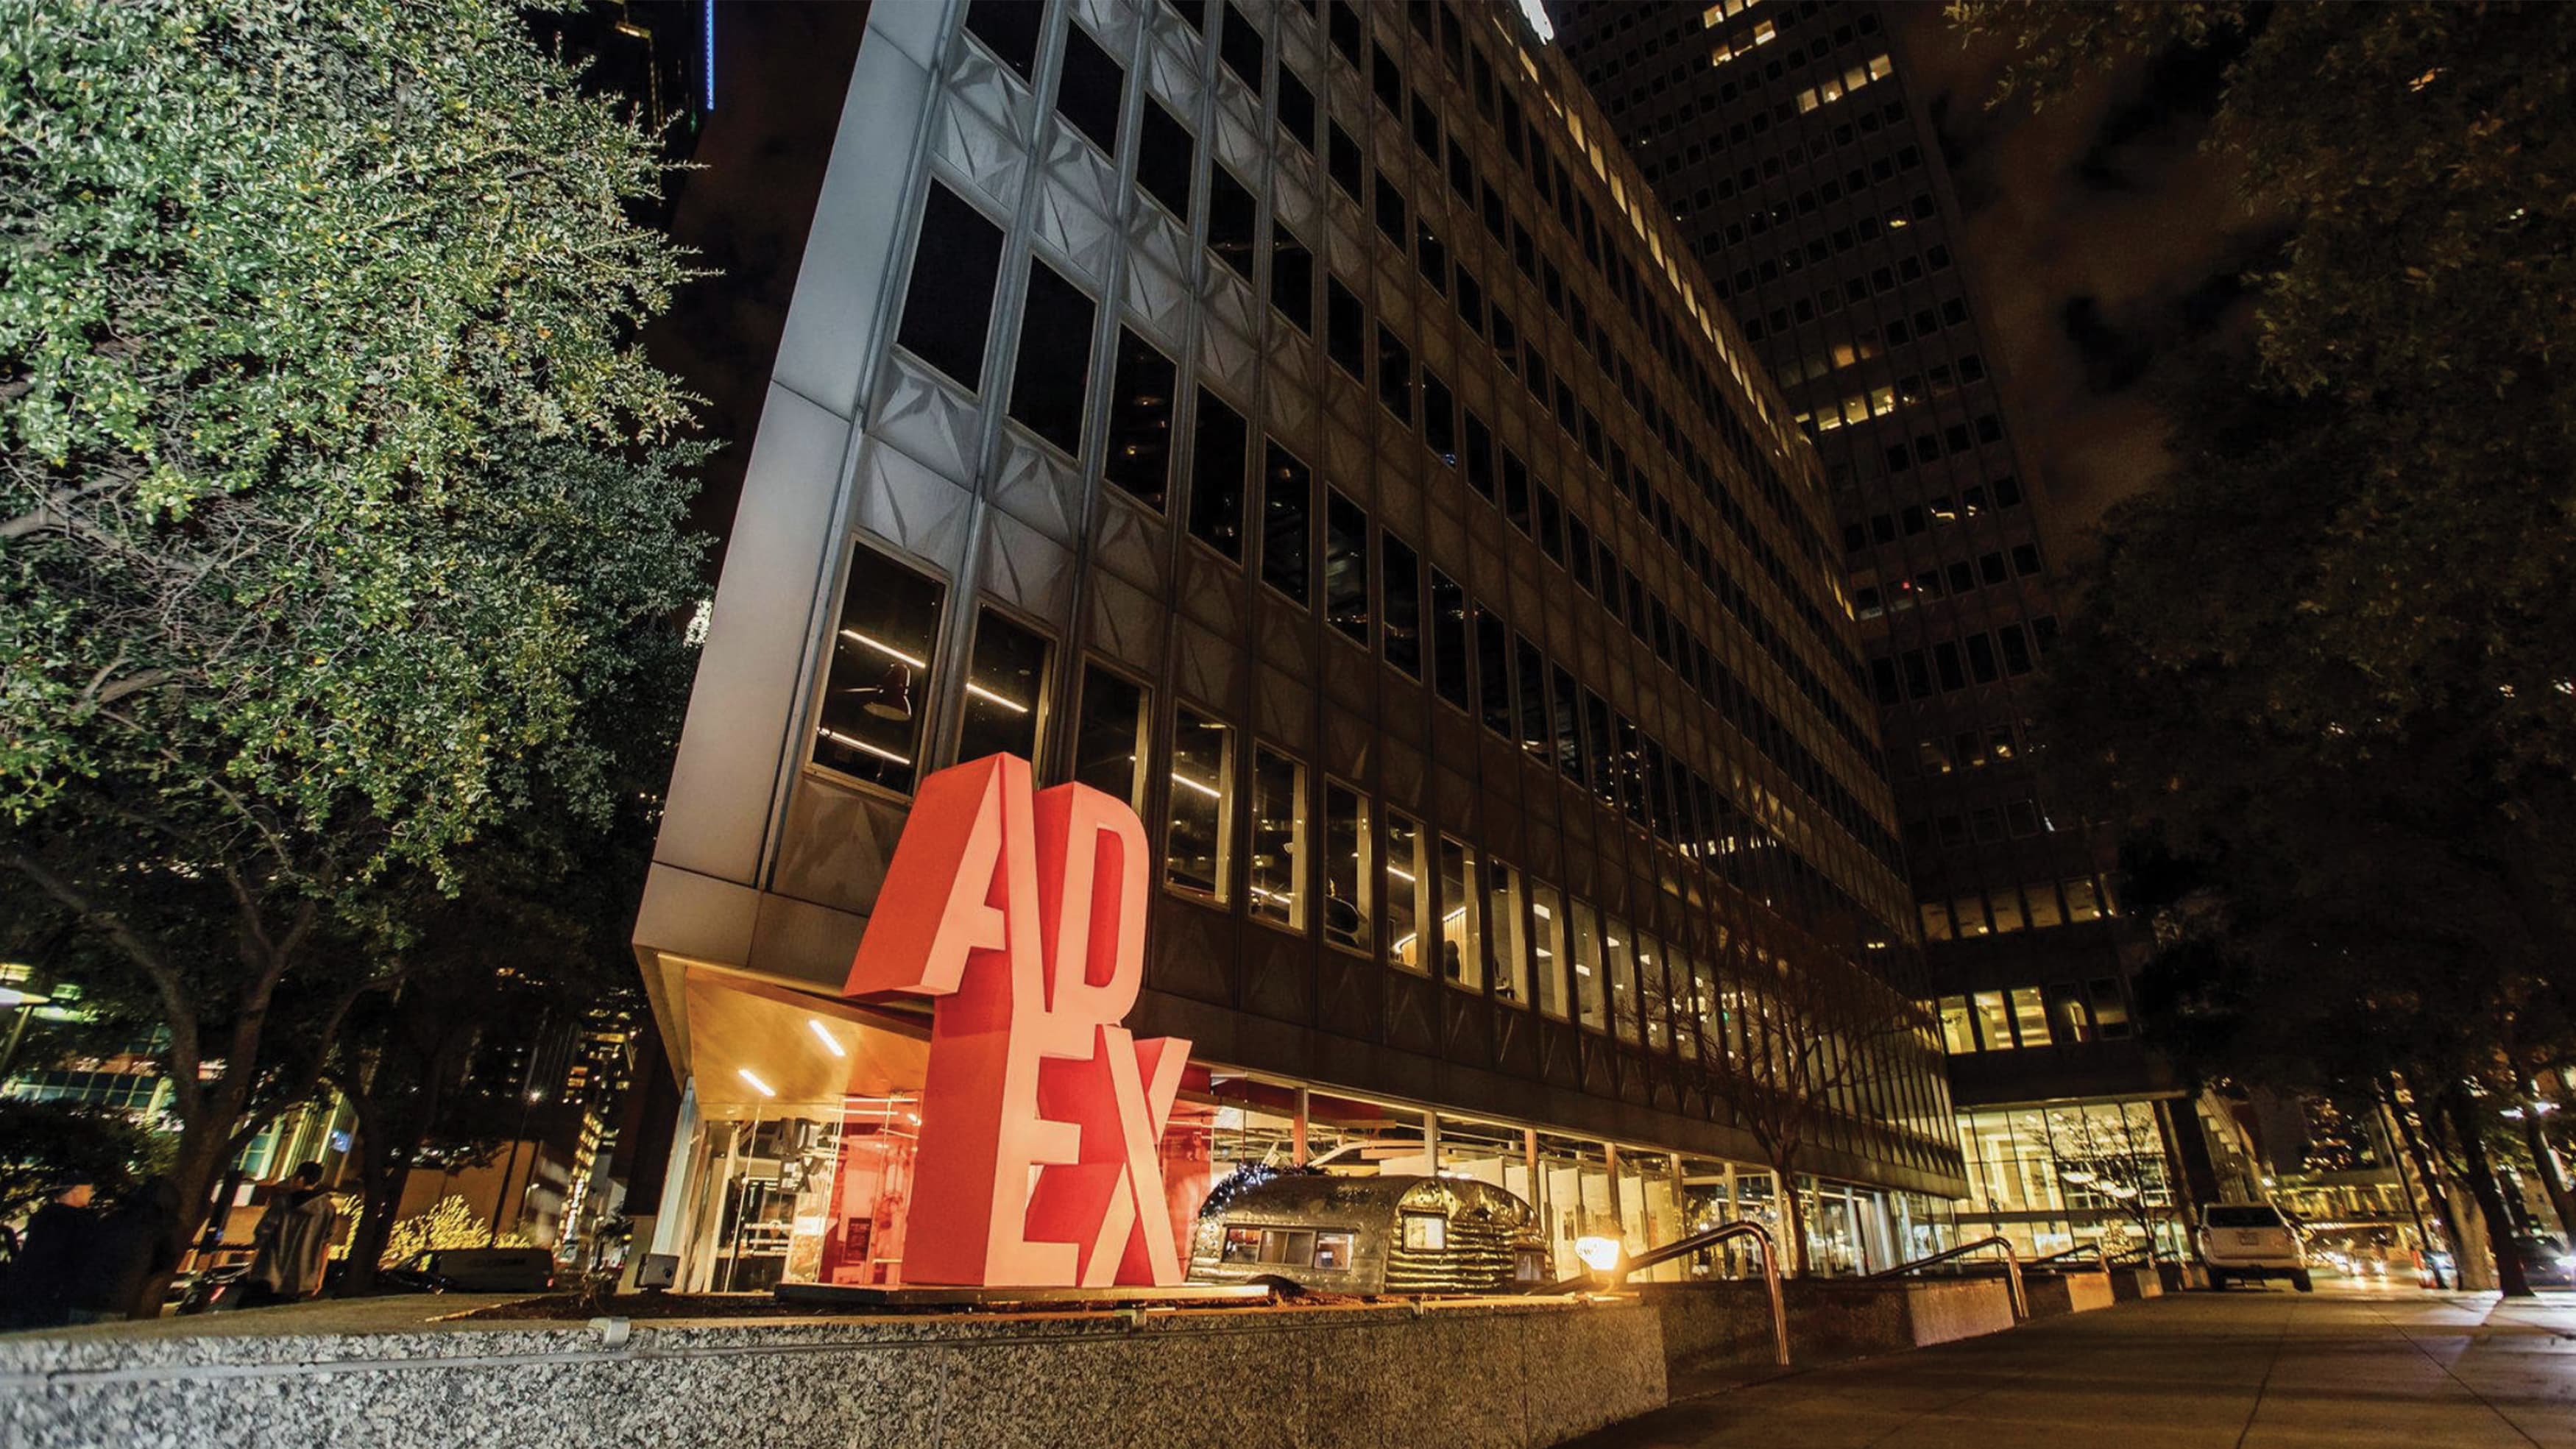 Exterior monument signage and streetscape outside Ad Ex building in downtown Dallas